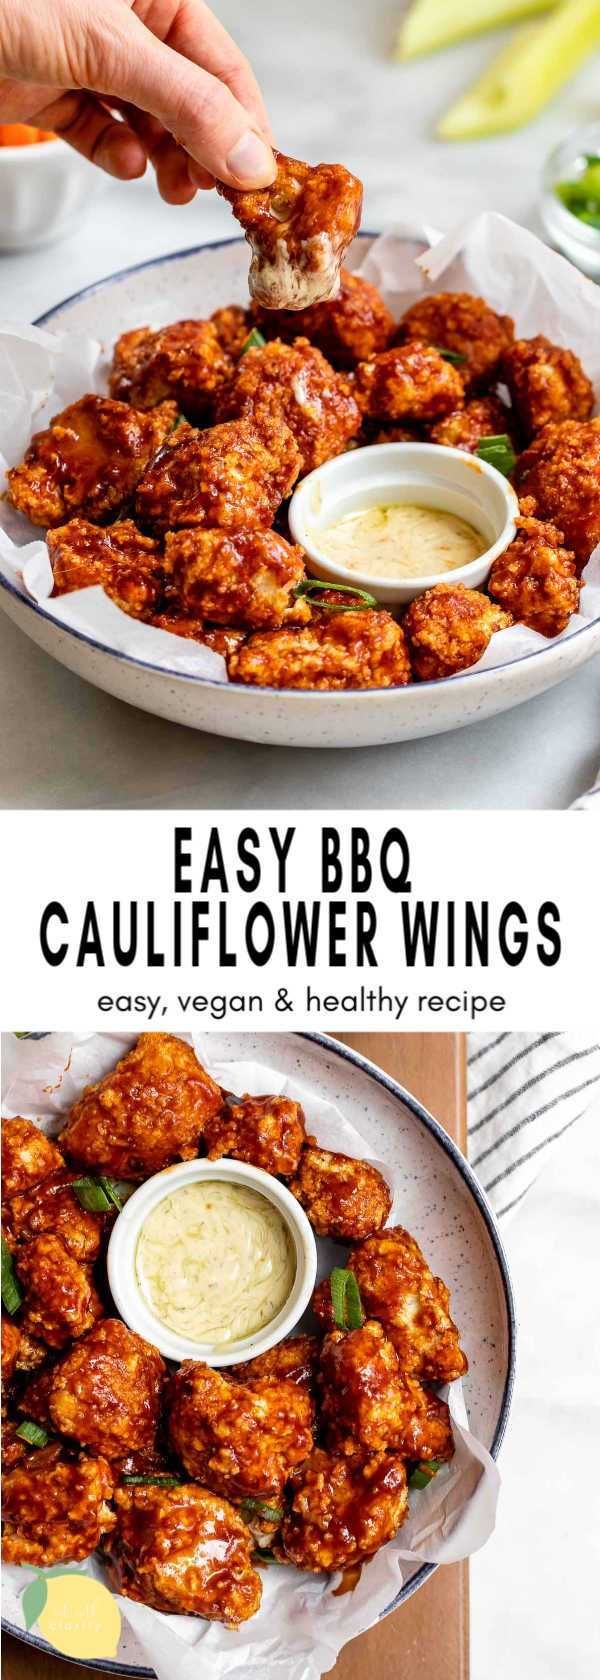 Baked BBQ Cauliflower Wings | Eat With Clarity Small Bites -   17 healthy recipes Cauliflower vegans ideas